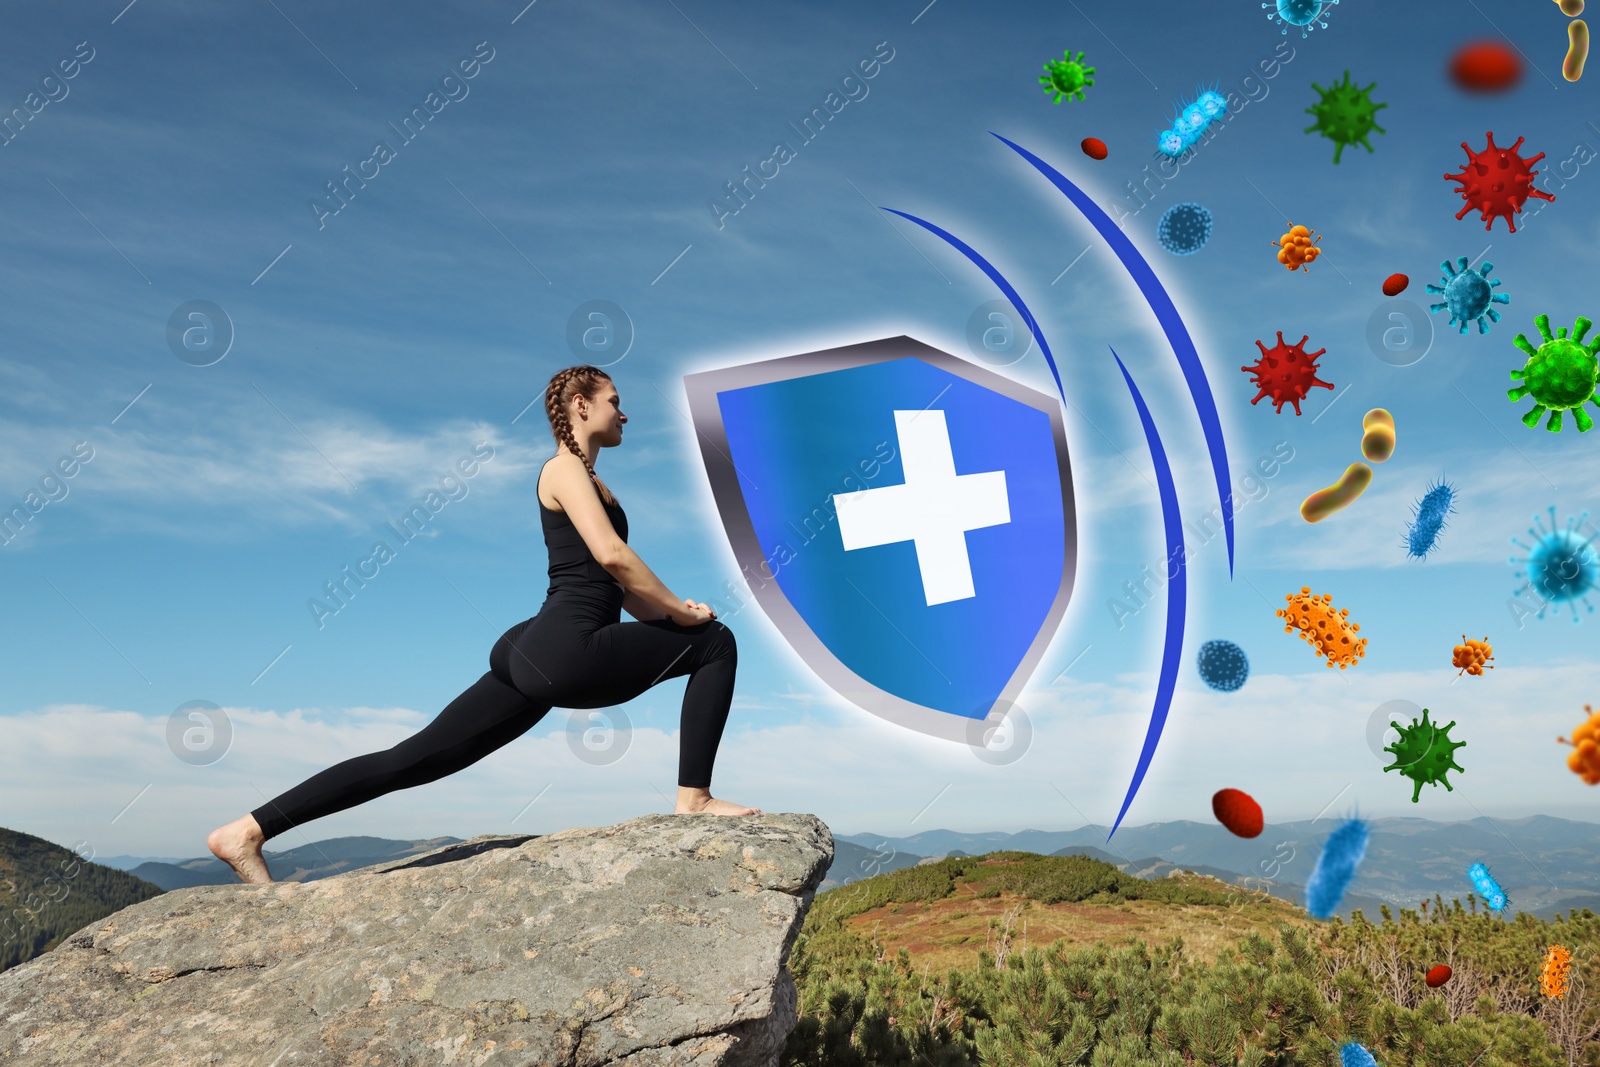 Image of Woman practicing yoga on rock in mountains. Strong immunity - shield against viruses